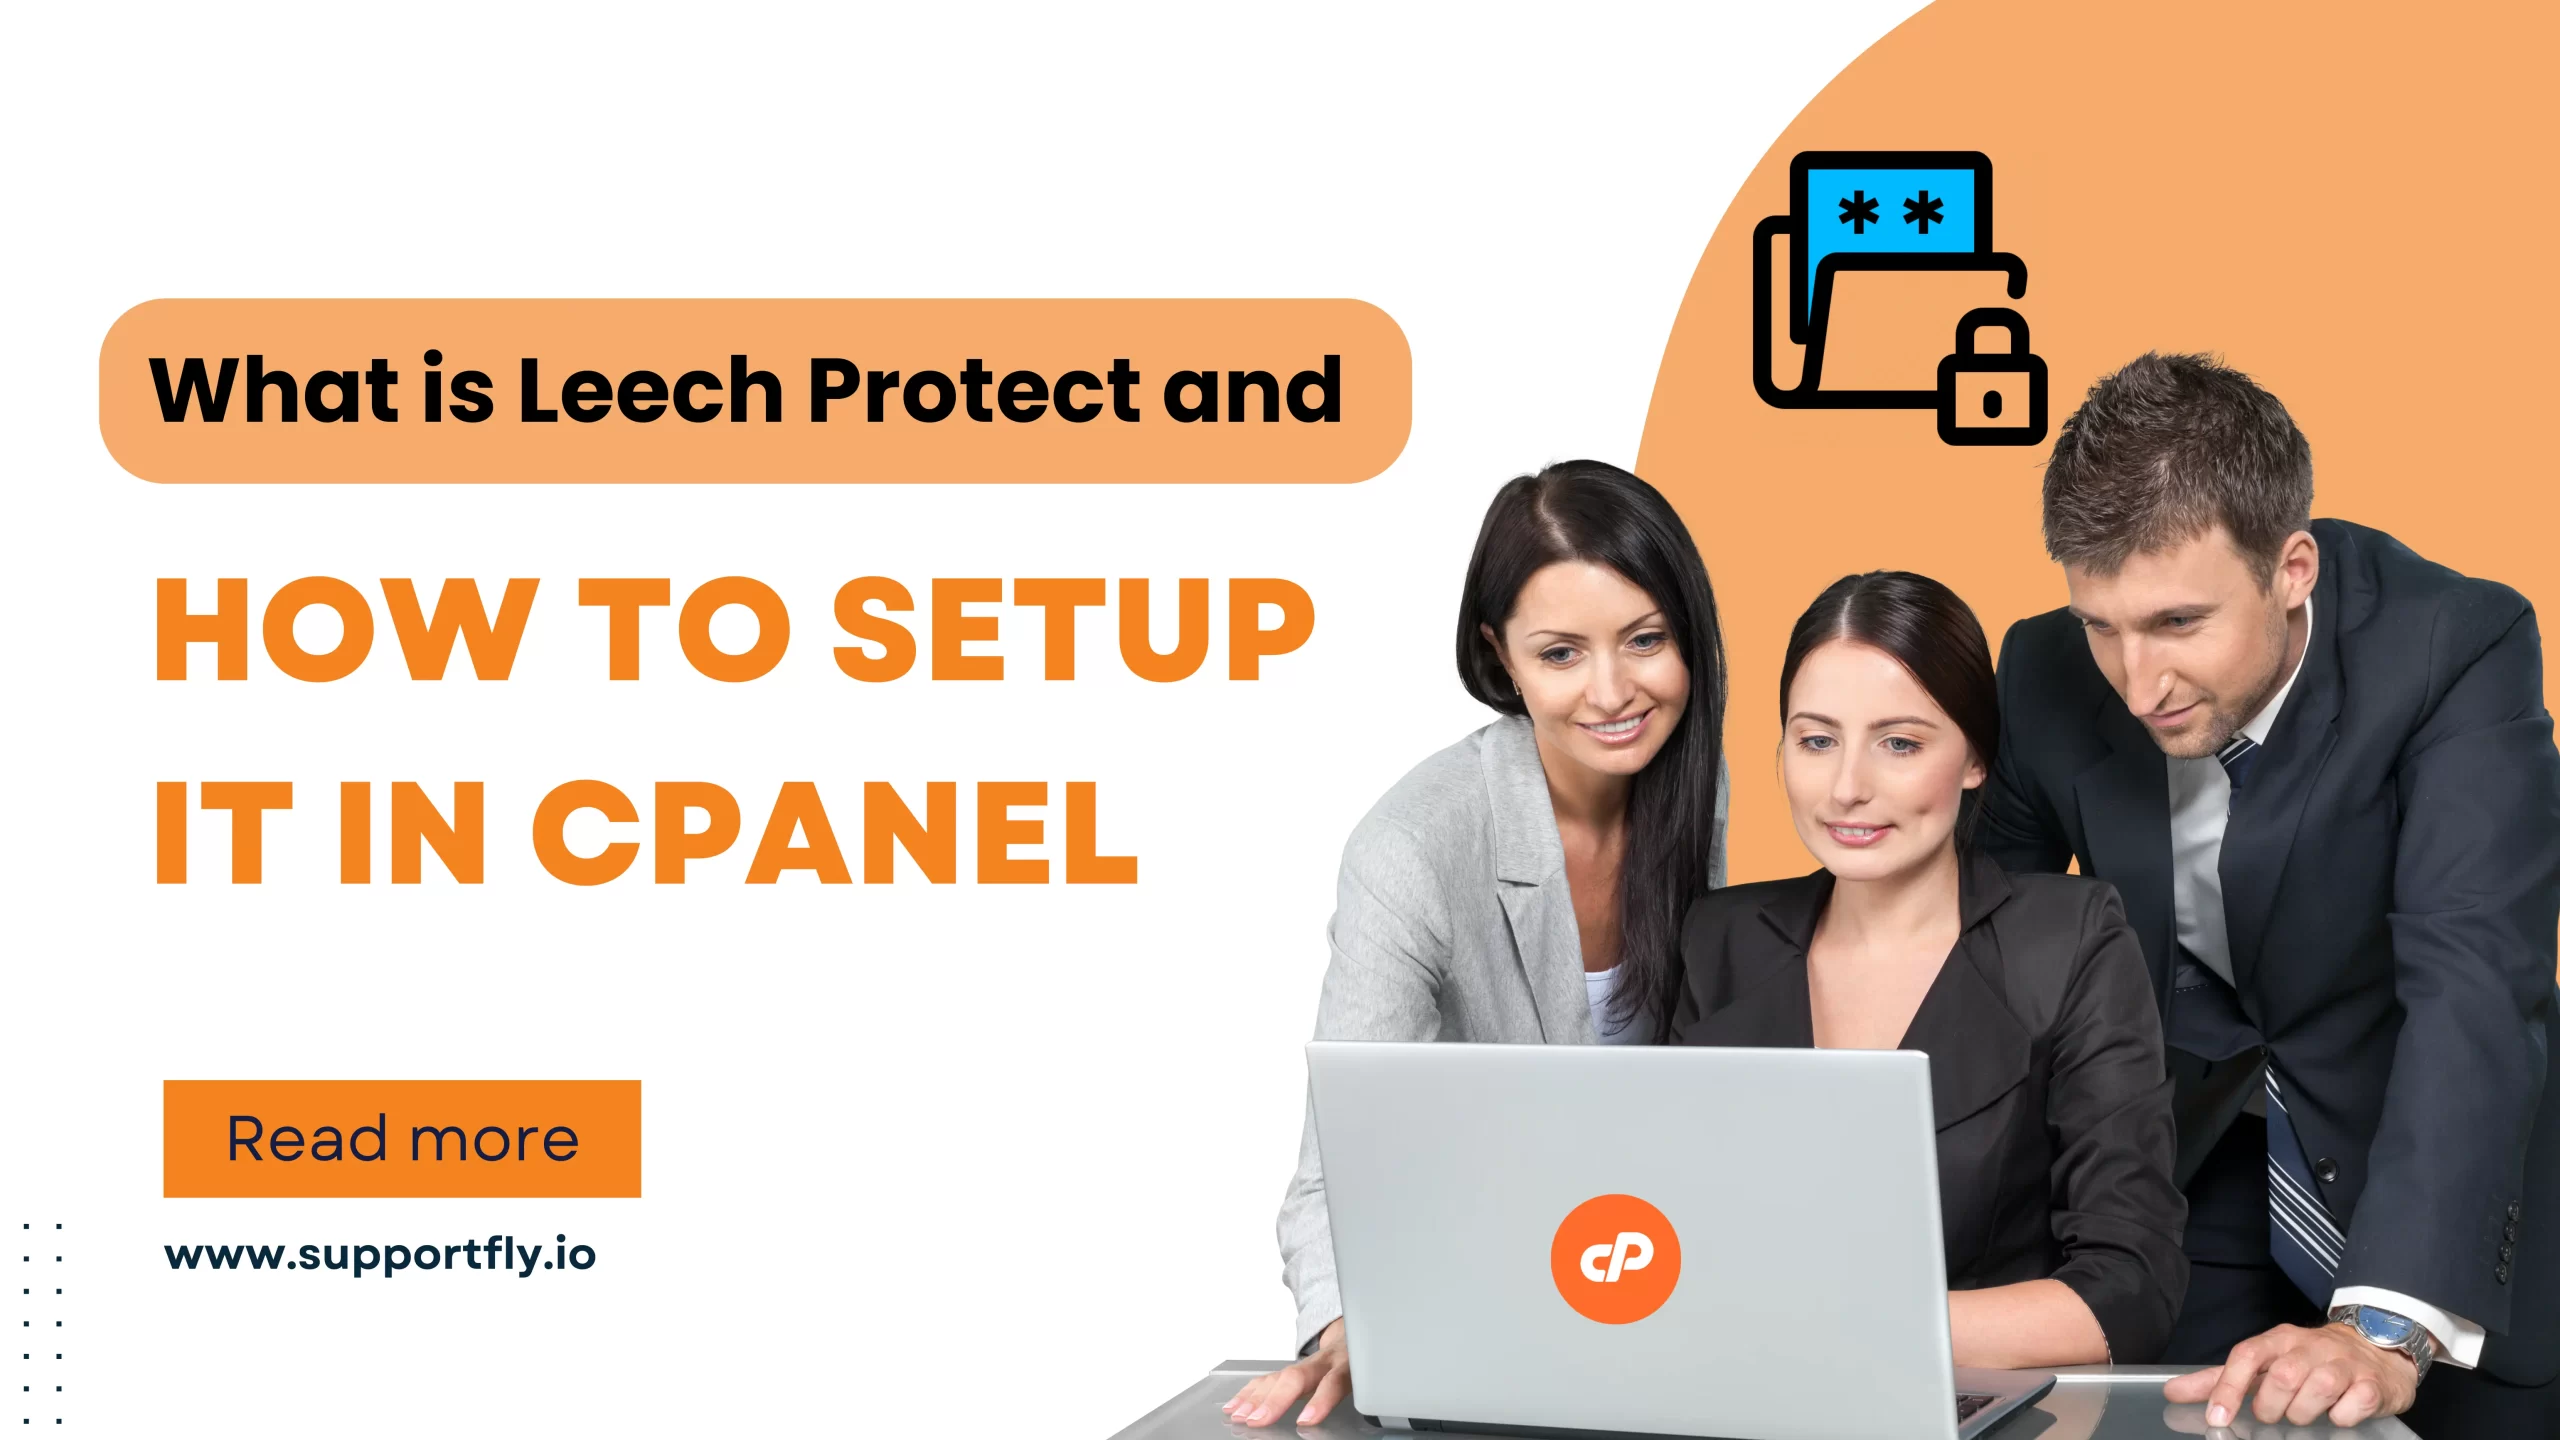 You are currently viewing What is Leech Protect and How to Setup it in cPanel